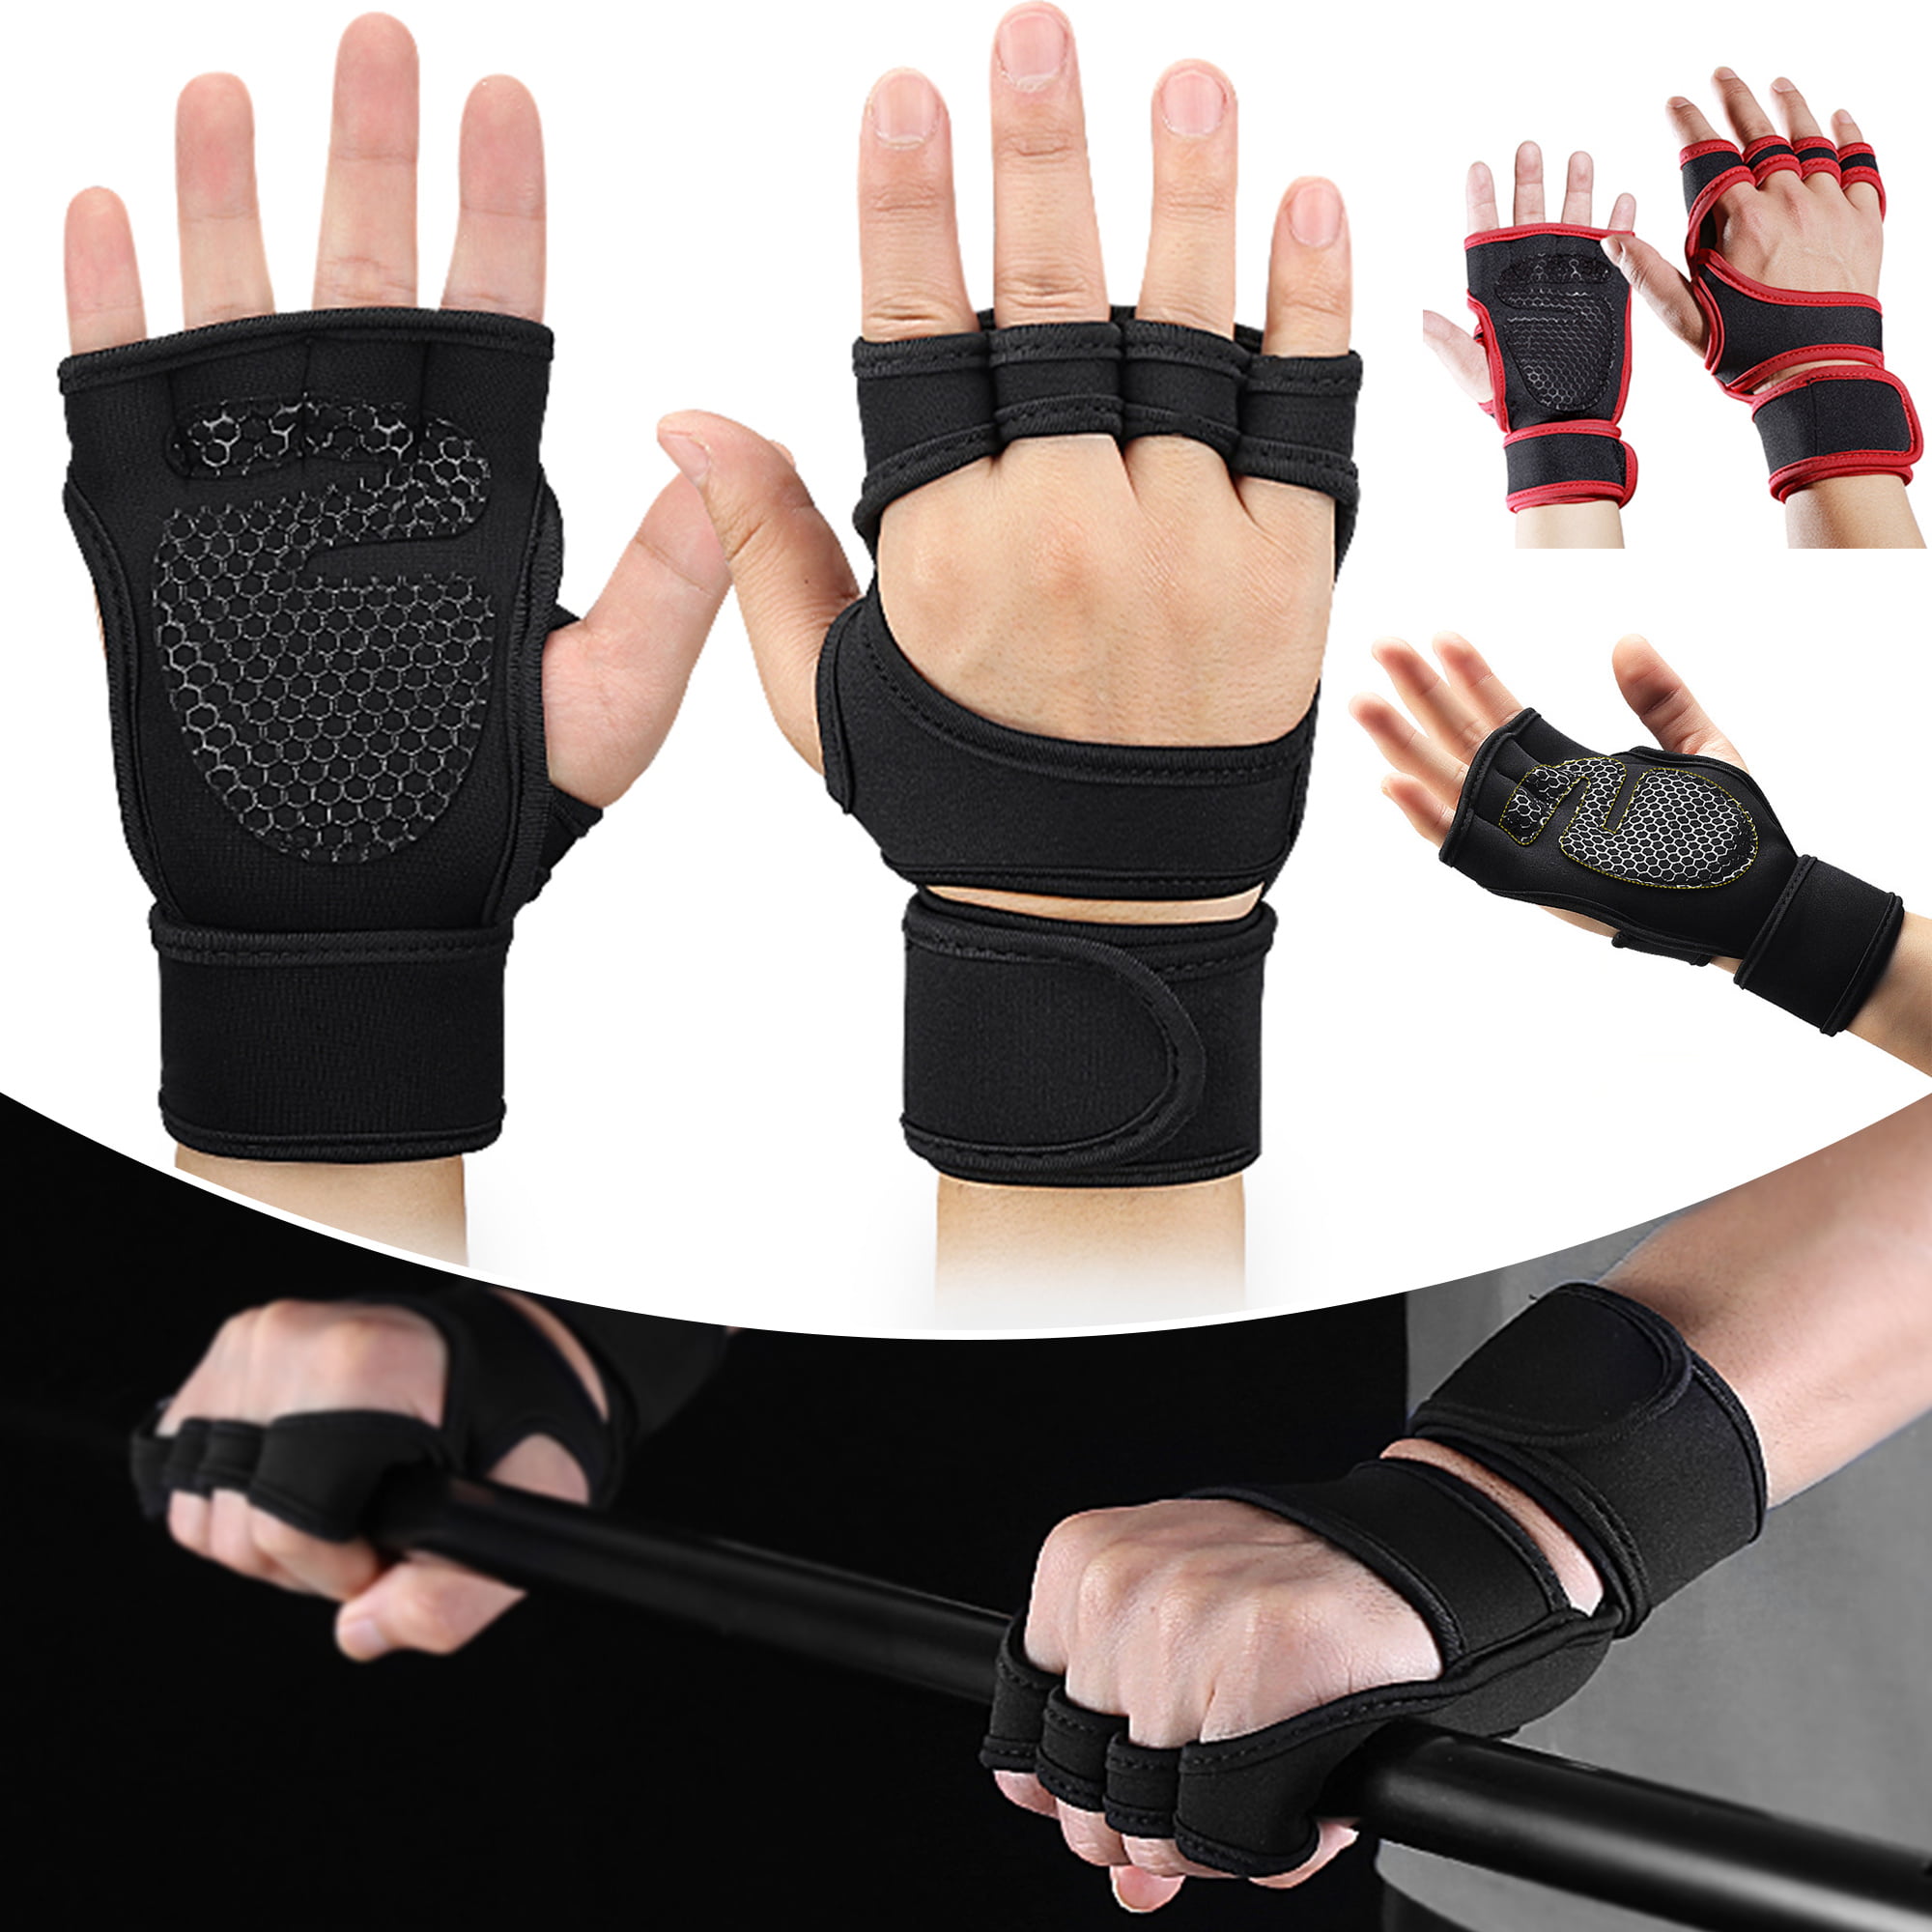 Weight Lifting Gloves,Gym Gloves for Women&Men,Sports Gloves with Extra Wrist Wraps Support,Full Palm Protection&Grip Exercise Gloves Workout Gloves for Pull-ups,Fitness,Cross Training,Weightlifting,Gym Workout,Powerlifting